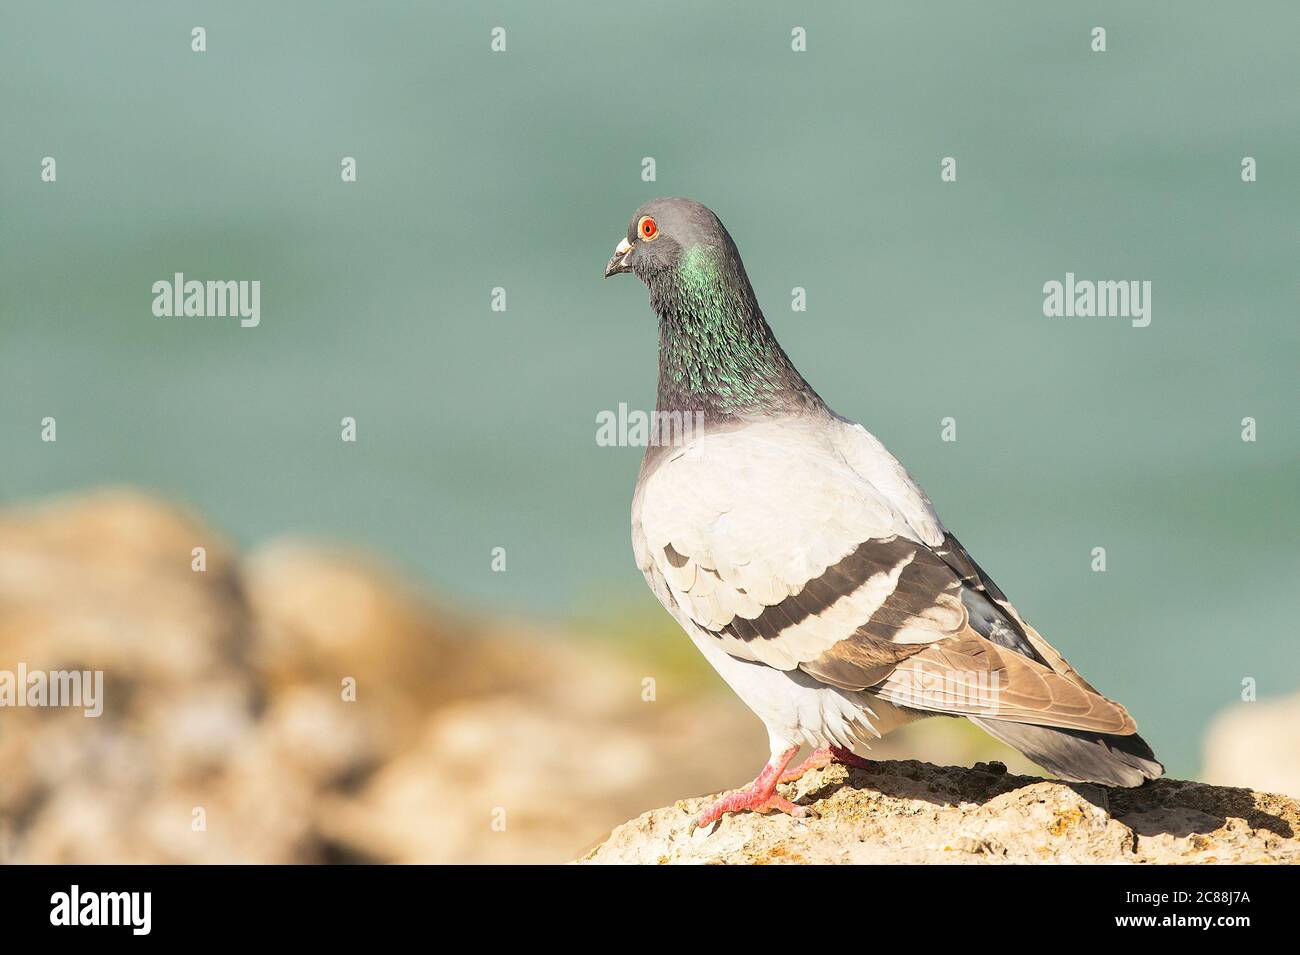 Columba livia.Resident located in the Mediterranean area. Reaches high flights in areas of nesting and feeding. City of Peniche. Portugal. Stock Photo